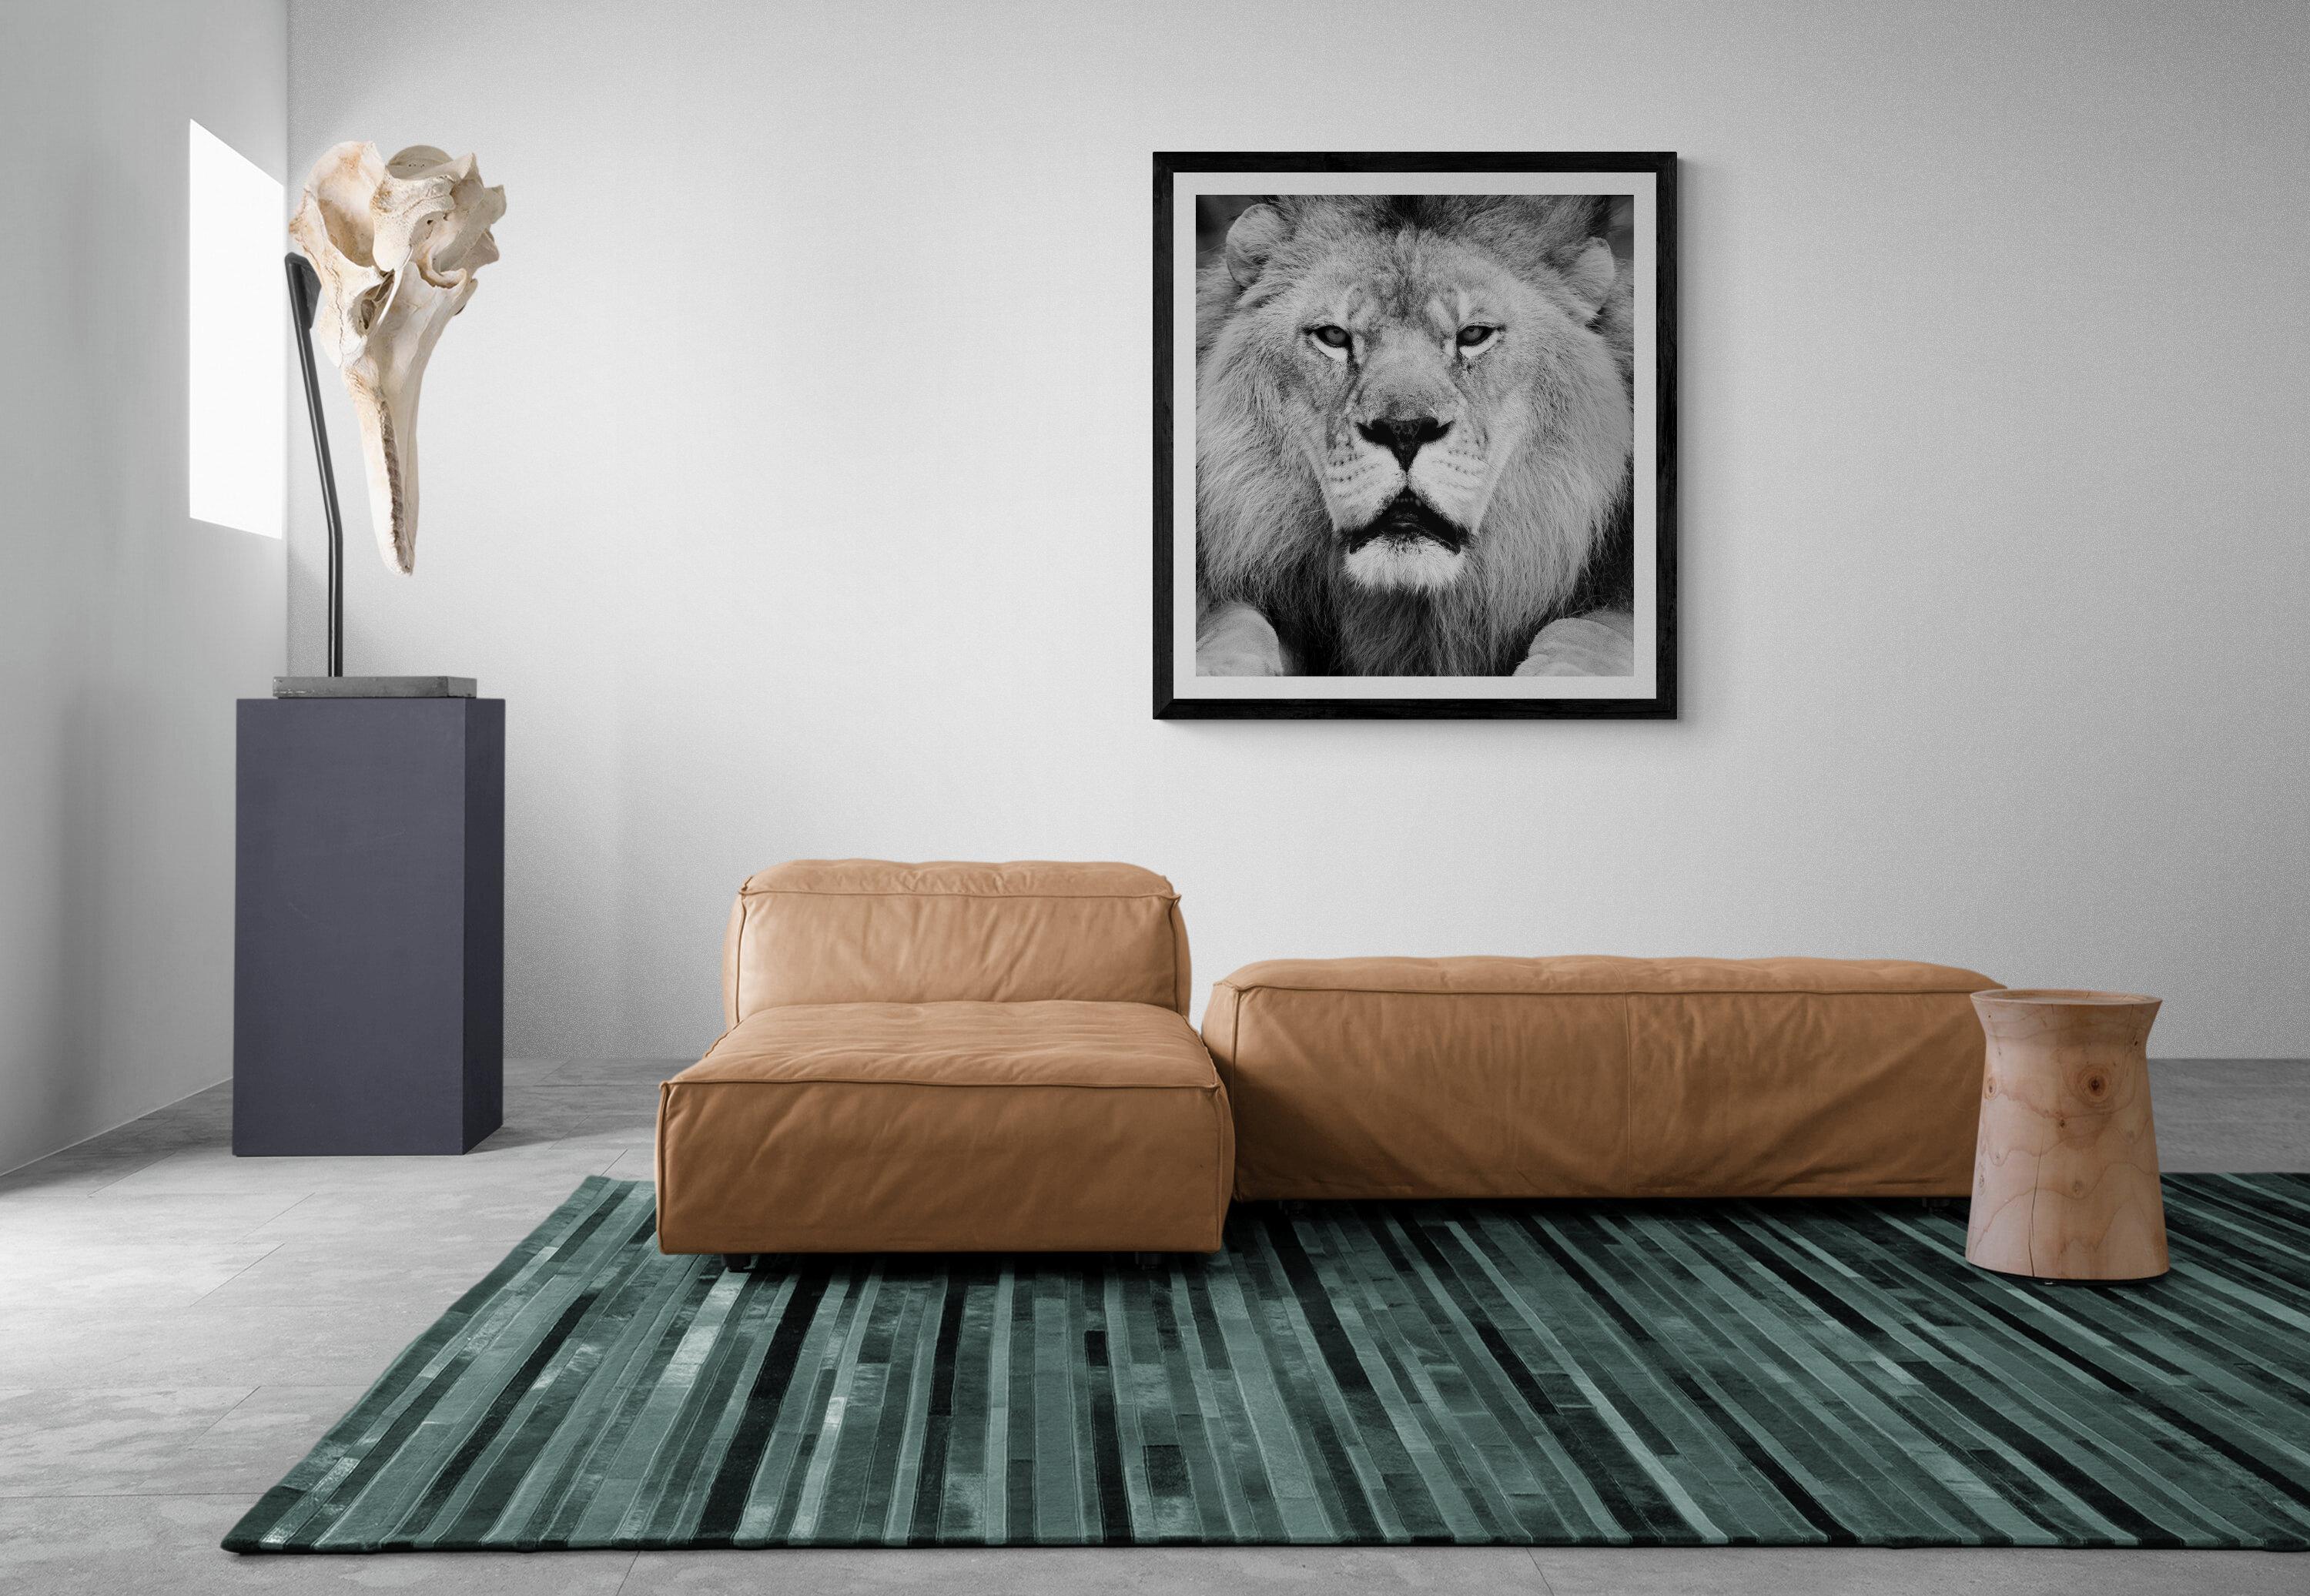 This is a contemporary black and white photograph of an African Lion by Shane Russeck. 
36x48 edition of 12
Signed and numbered 
Printed on archival paper and using archival inks
Framing available. Inquire for rates. 


Shane Russeck has built a